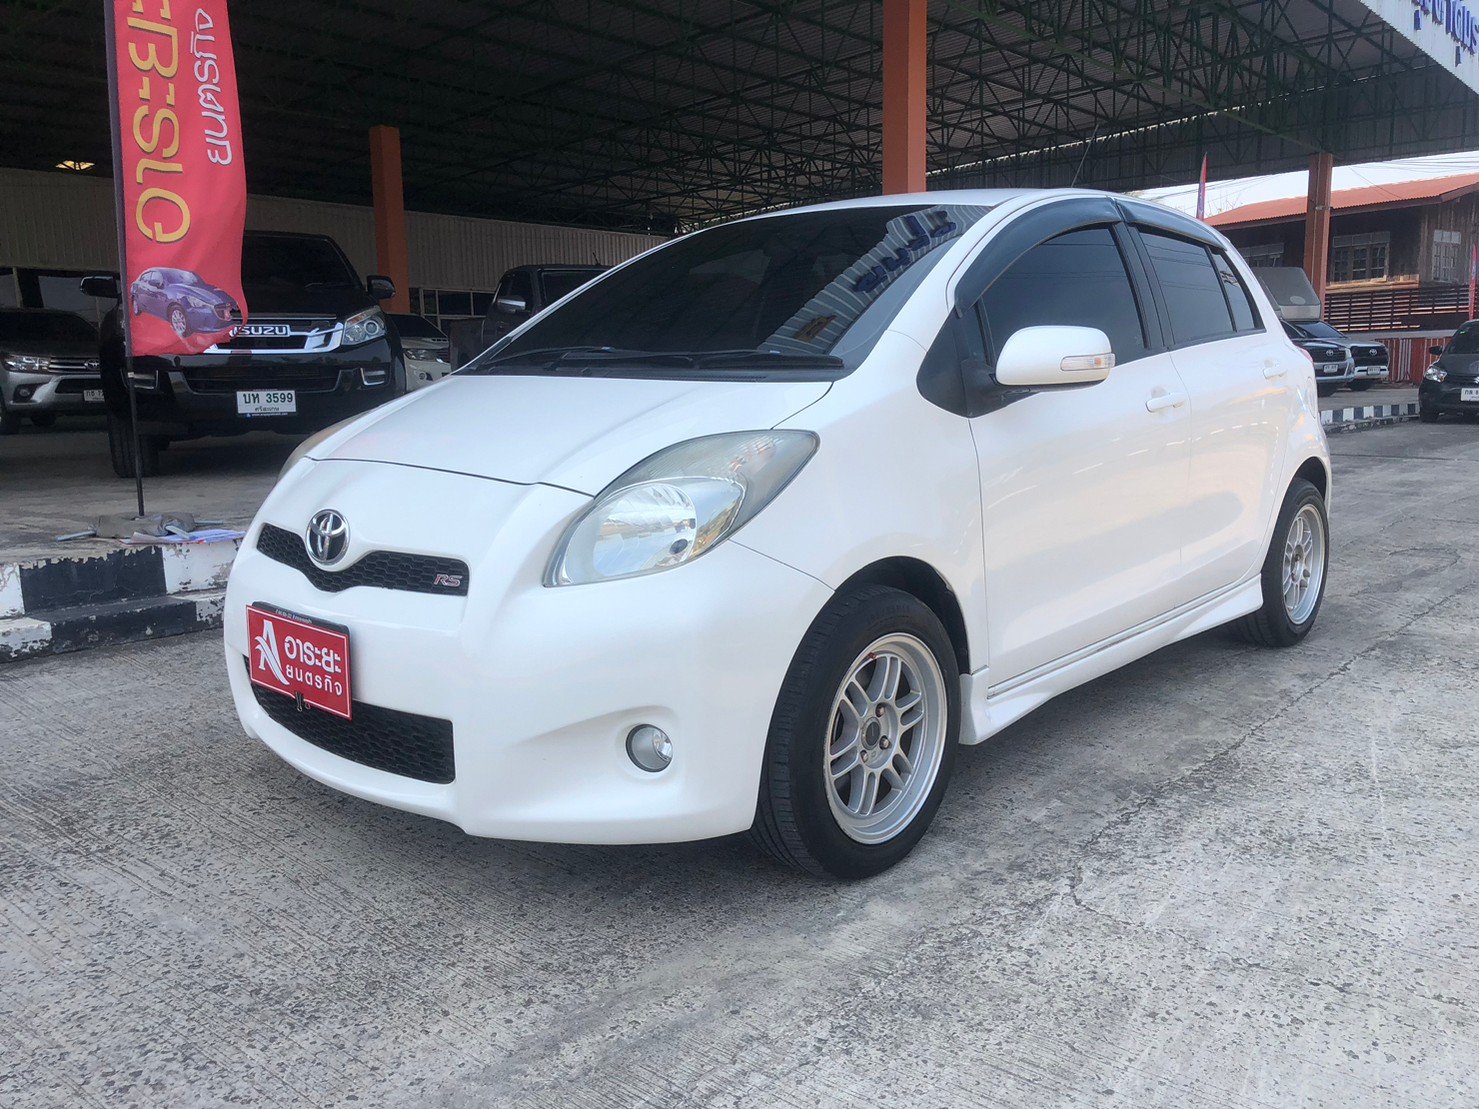 TOYOTA YARIS 1.5 RS A/T 2012